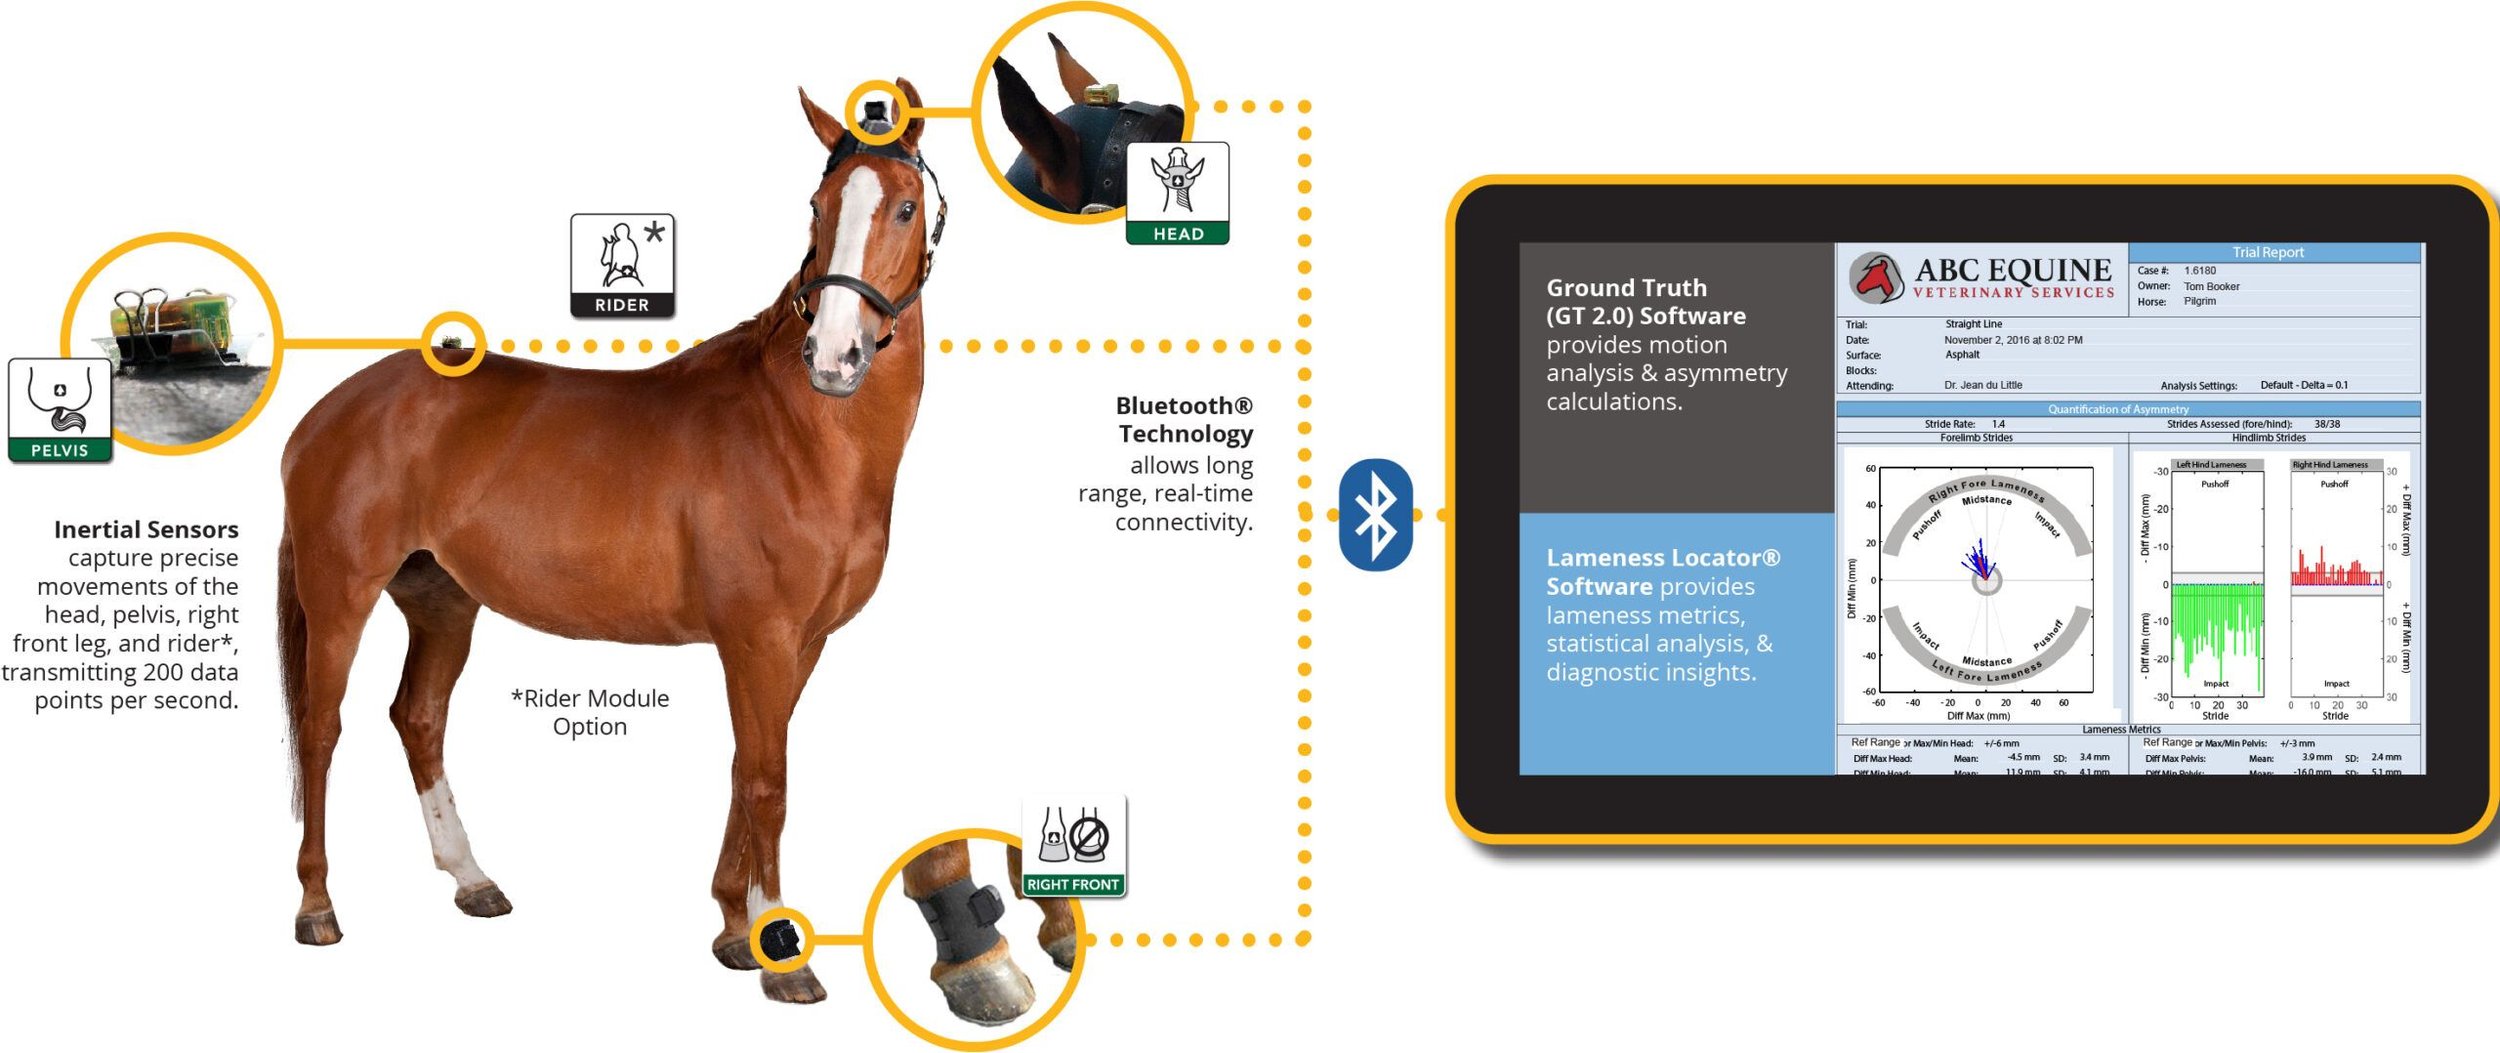 equinosis-Q-how-it-works-horse-with-tablet@4x-100-scaled-1.jpg